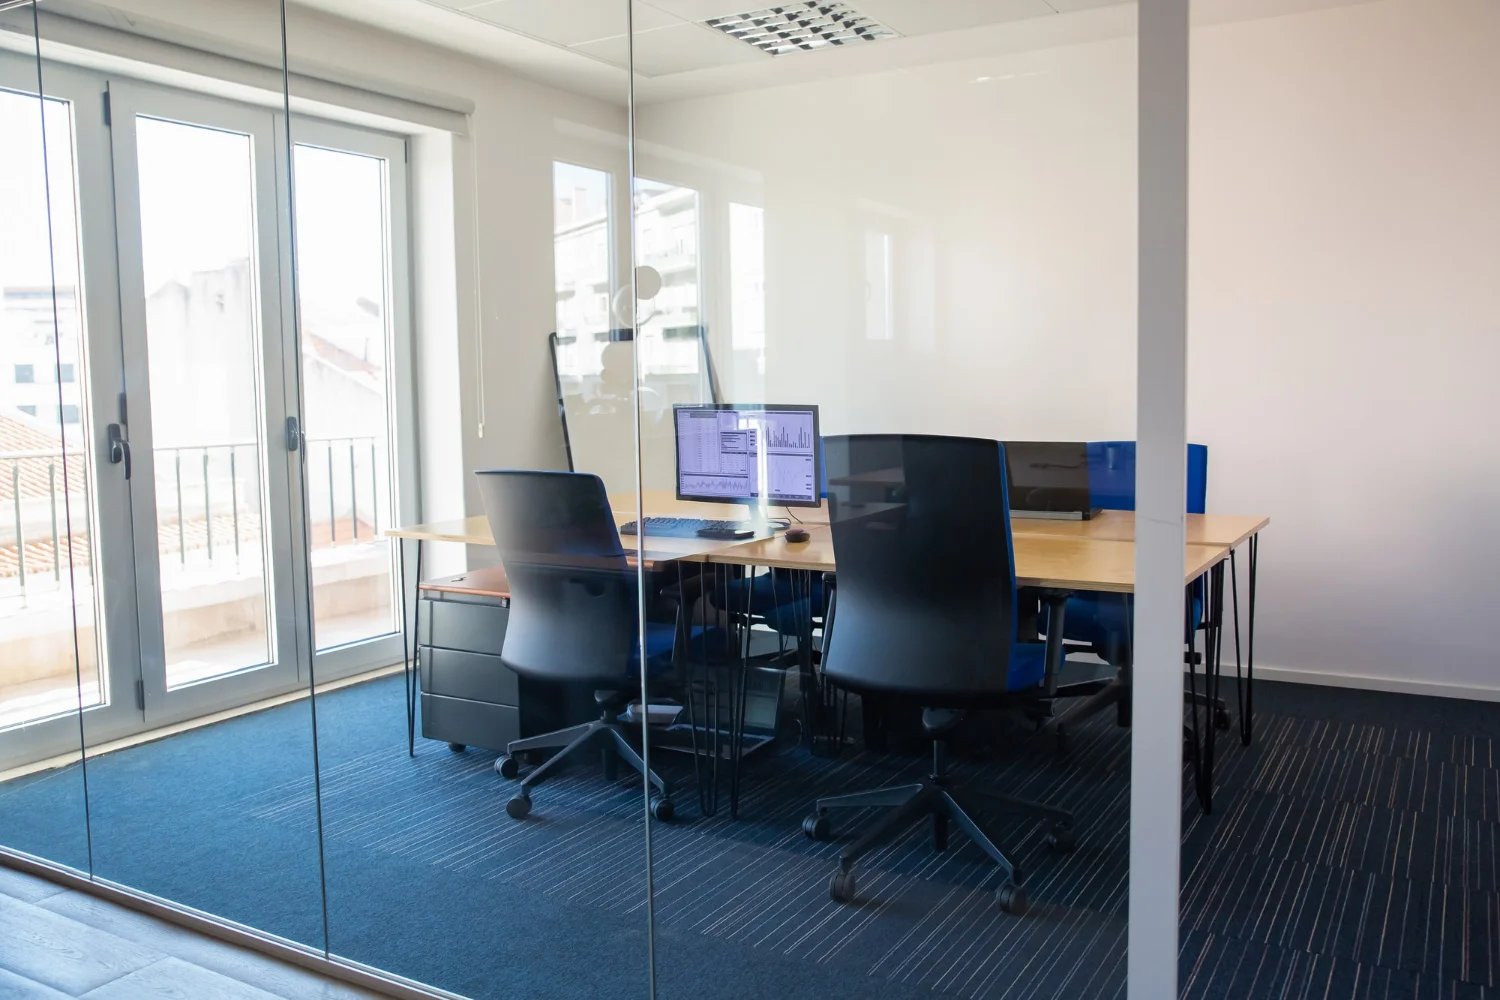 empty-boardroom-glass-wall-meeting-room-with-conference-table-shared-desk-team-workplaces-trading-graphs-monitor-office-interior-commercial-real-estate-concept